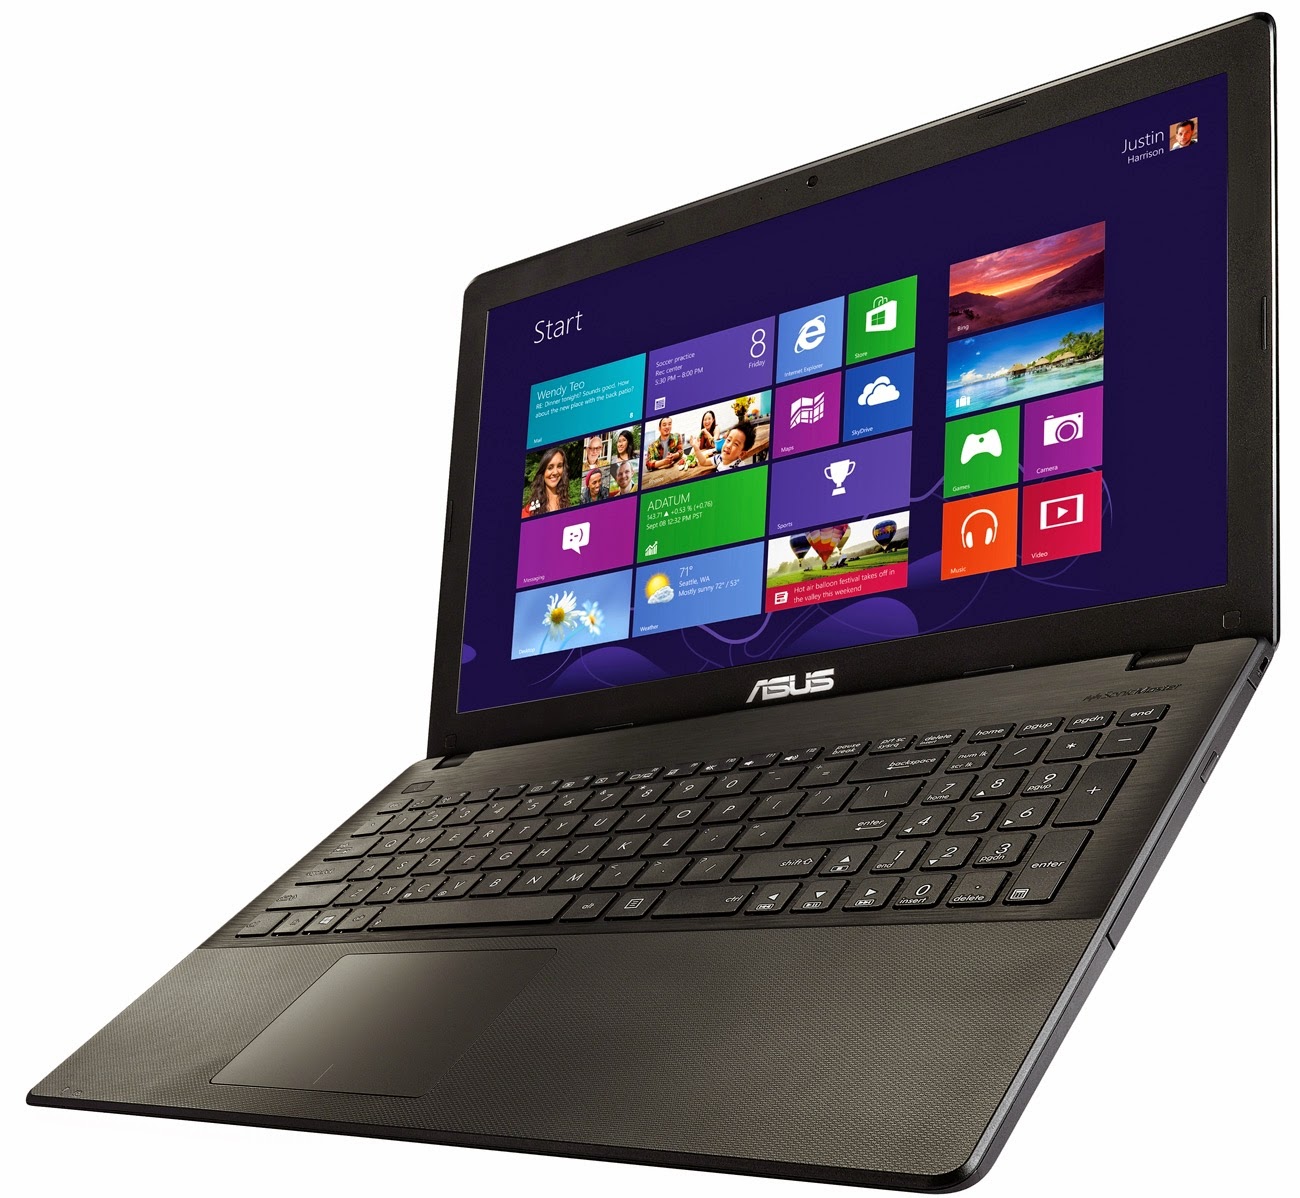 Asus X551M Laptop, Price, Specification, Unboxing & Review 